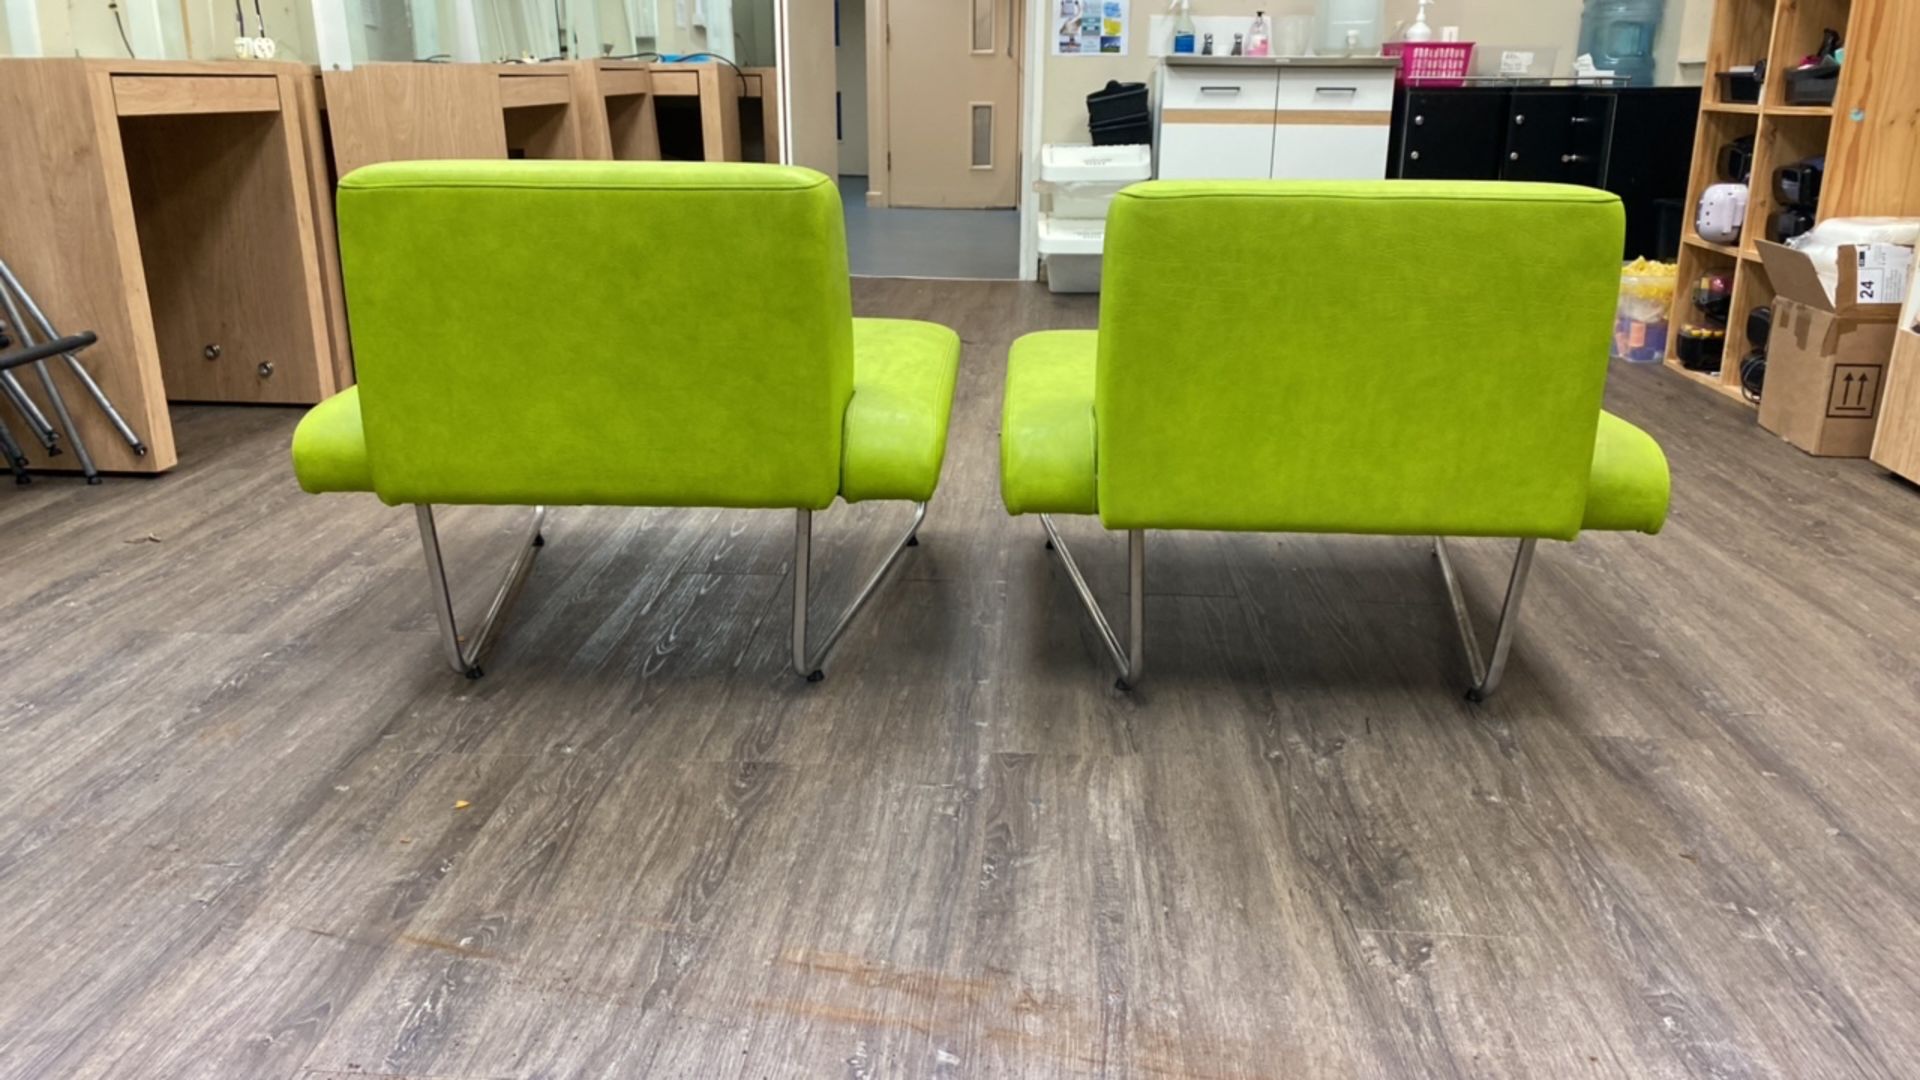 Pair of Contemporary Reception Chairs - Image 6 of 12